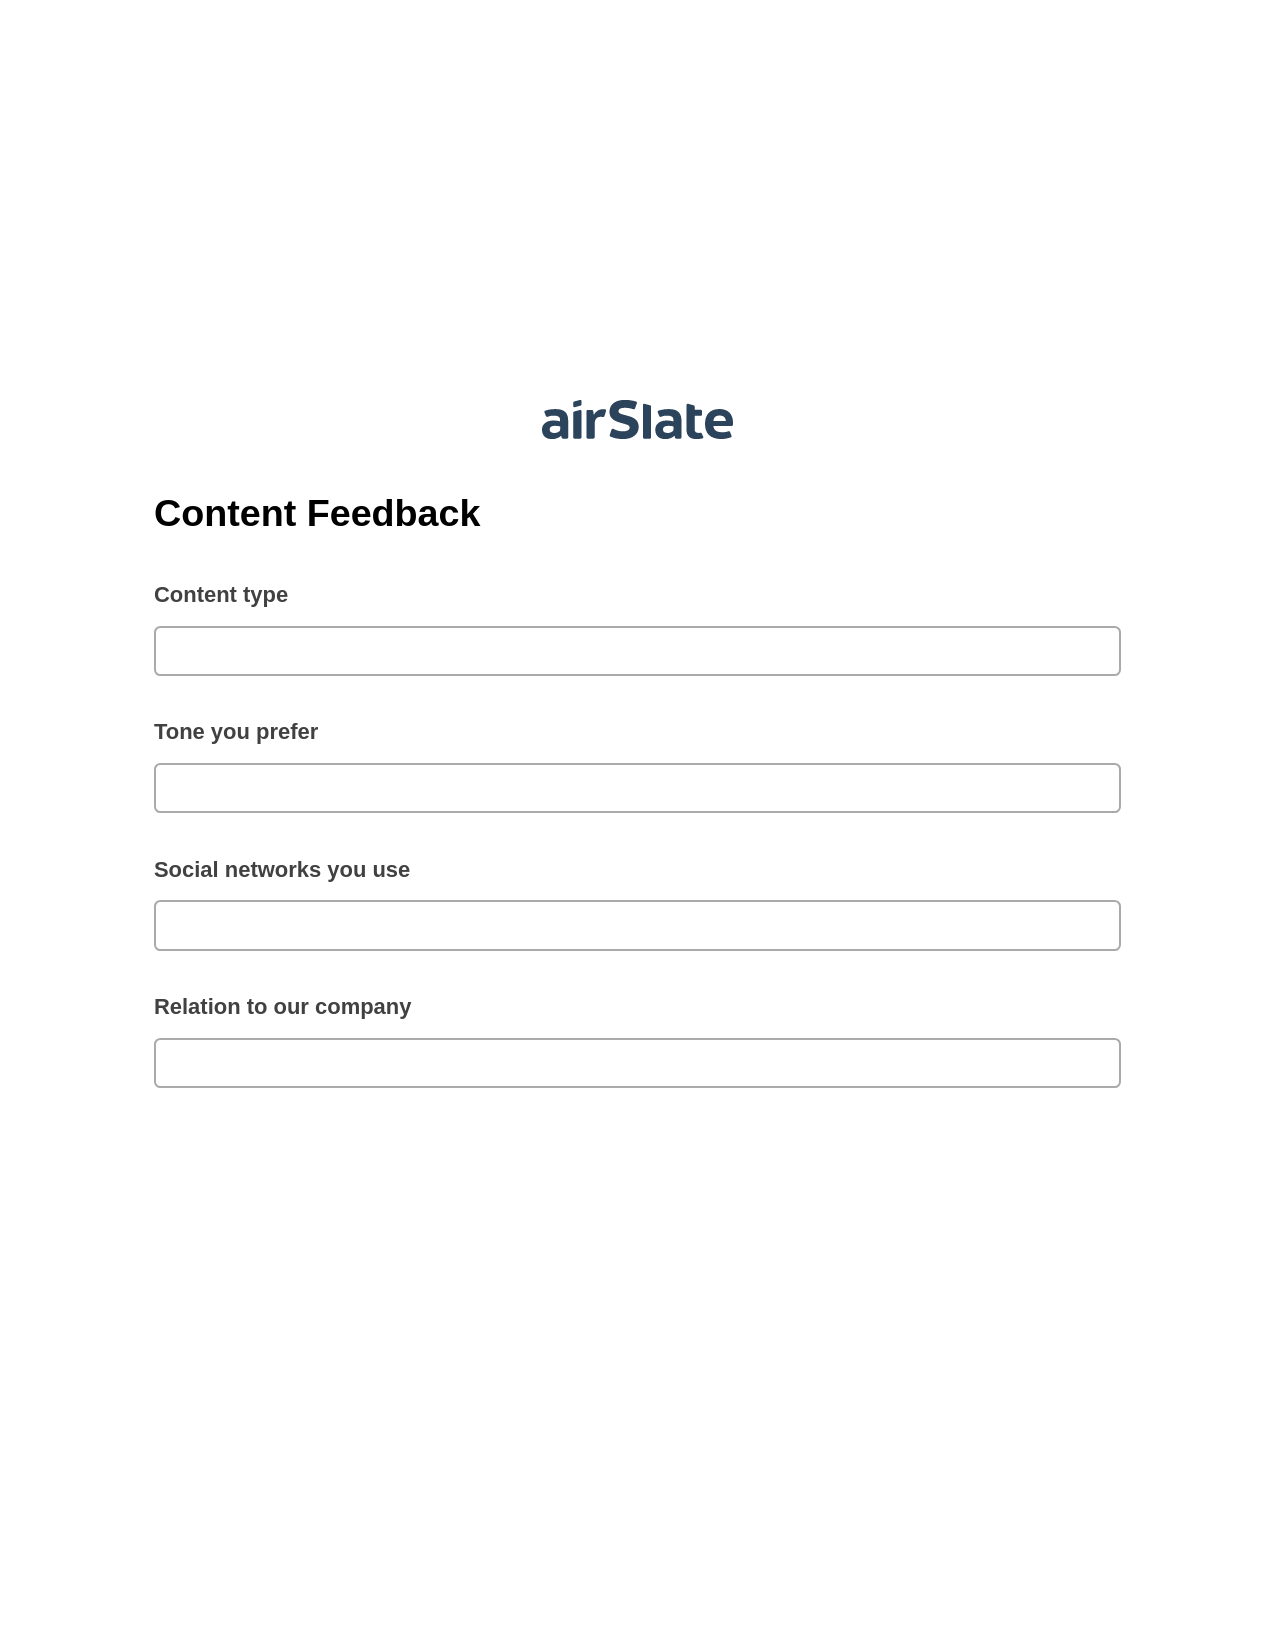 Content Feedback Pre-fill Dropdowns from CSV File Bot, Unassign Role Bot, Archive to SharePoint Folder Bot